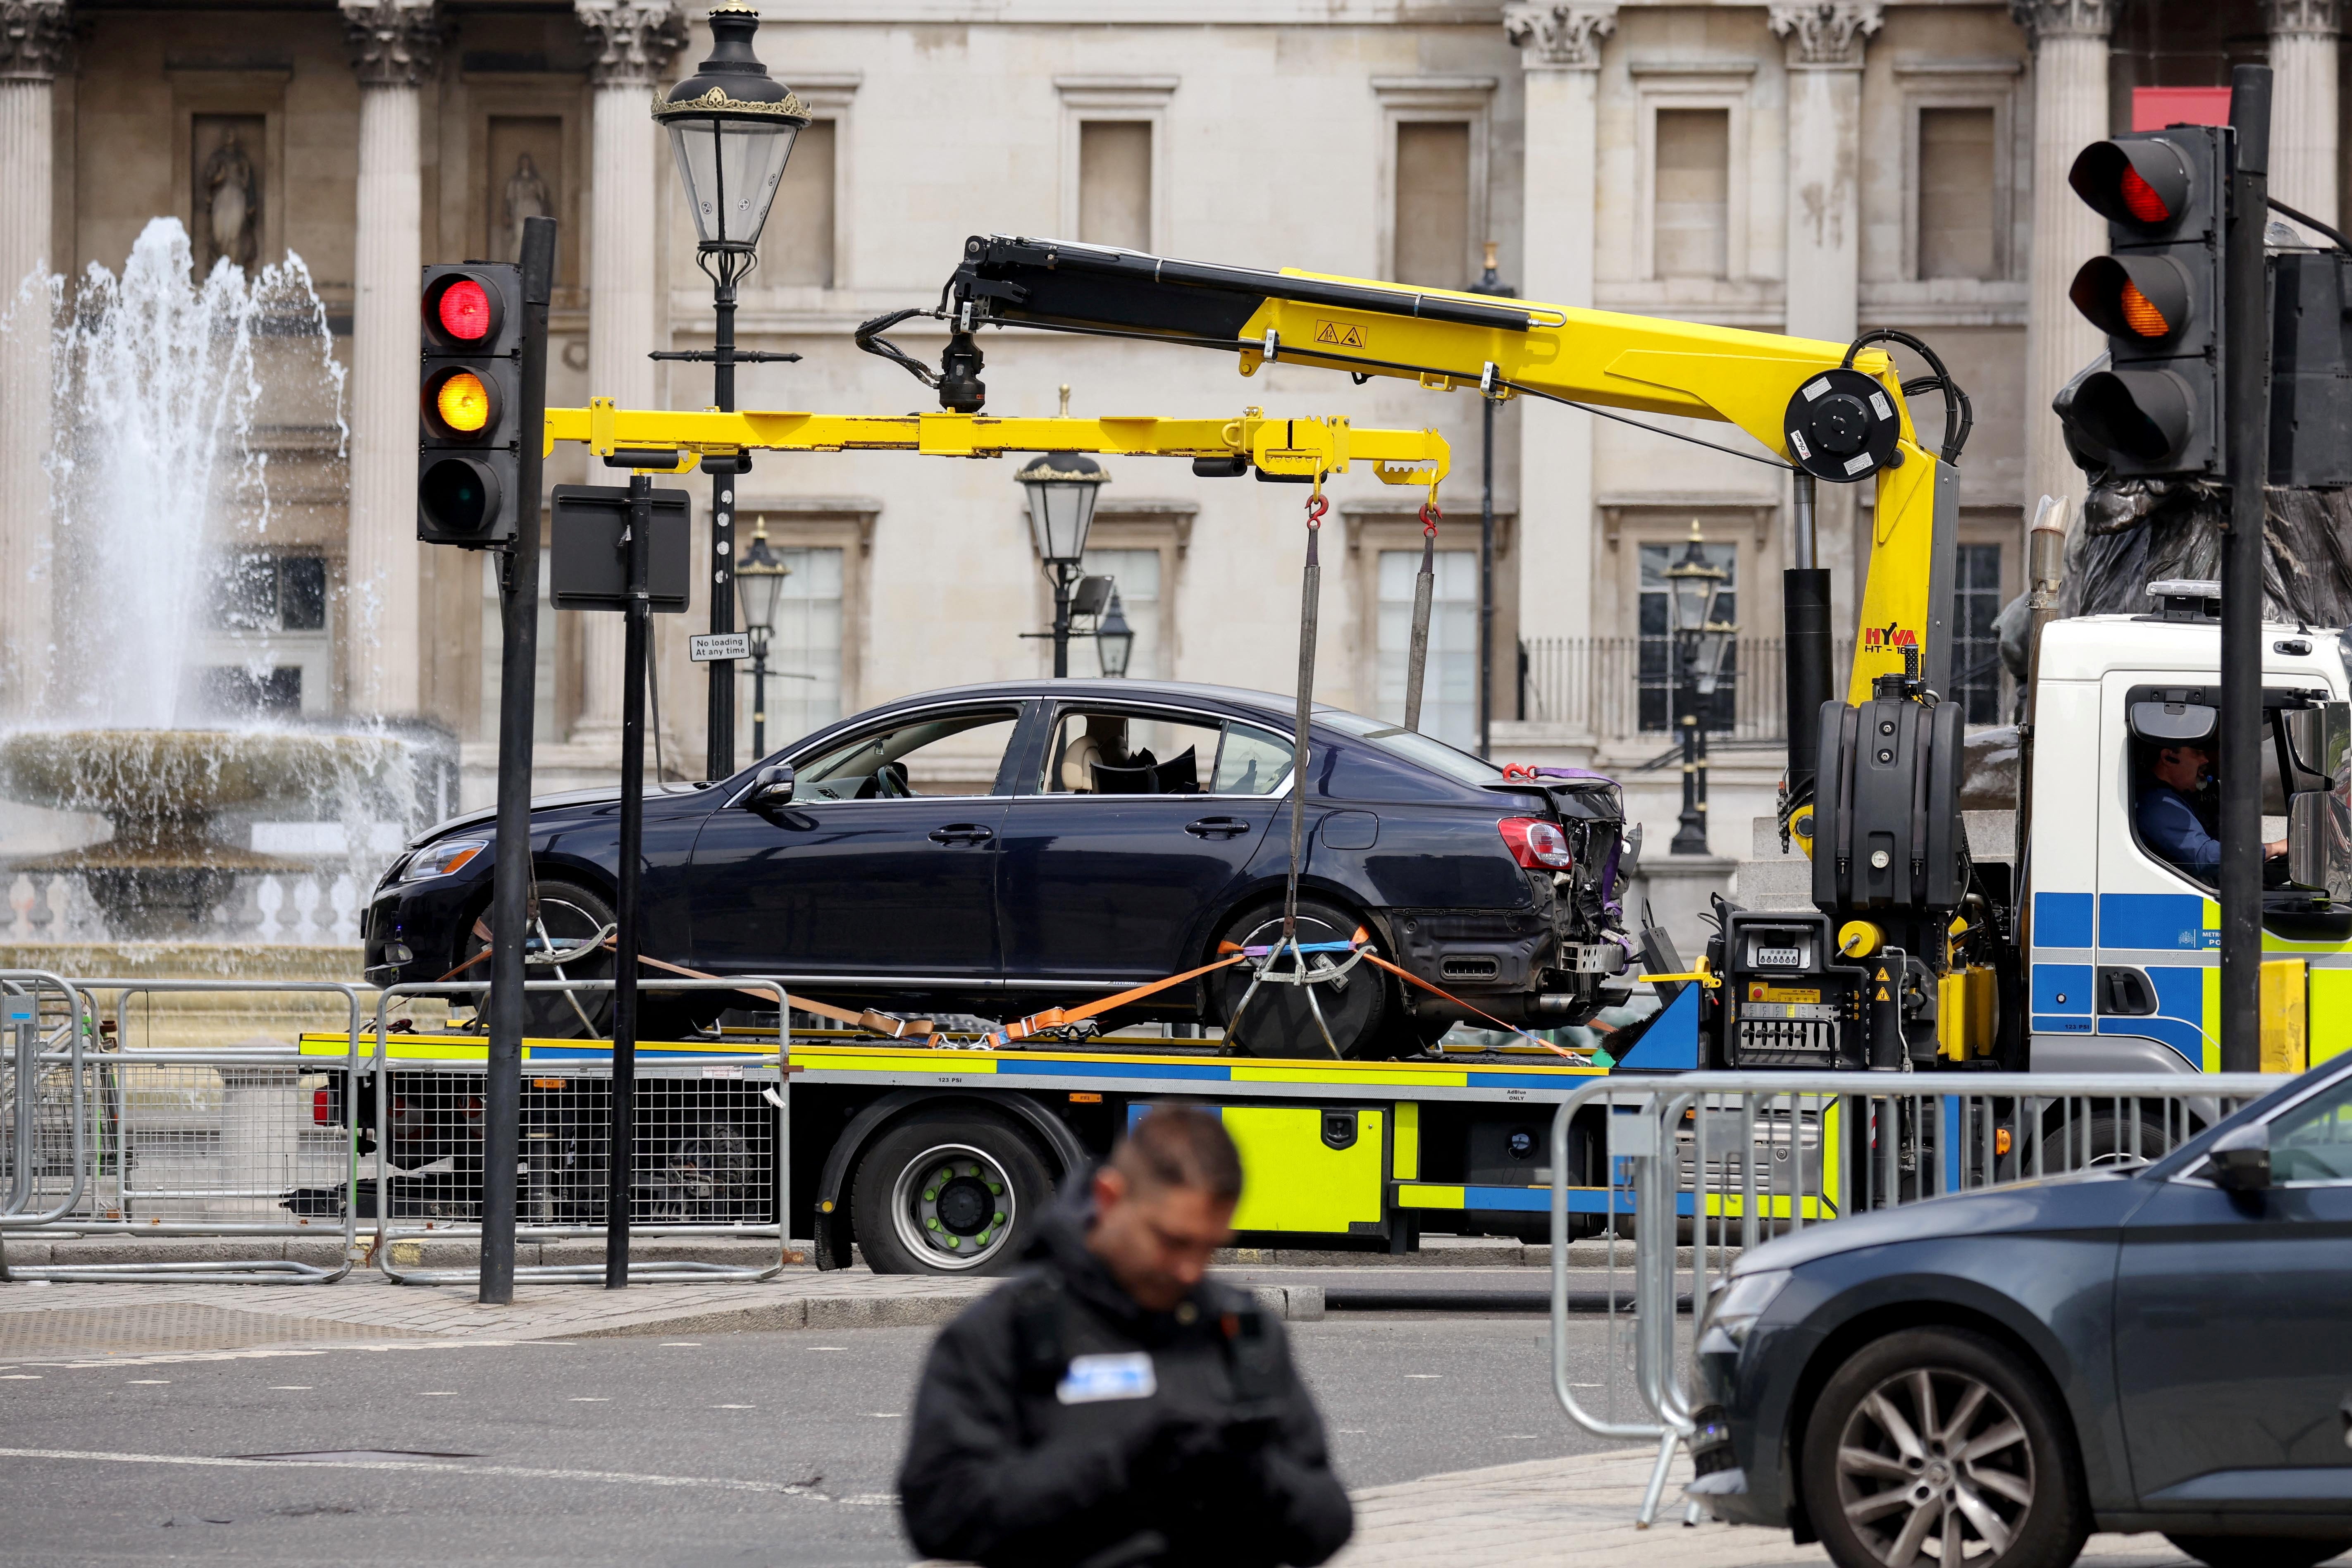 Police tow away a car from Trafalgar Square in central London